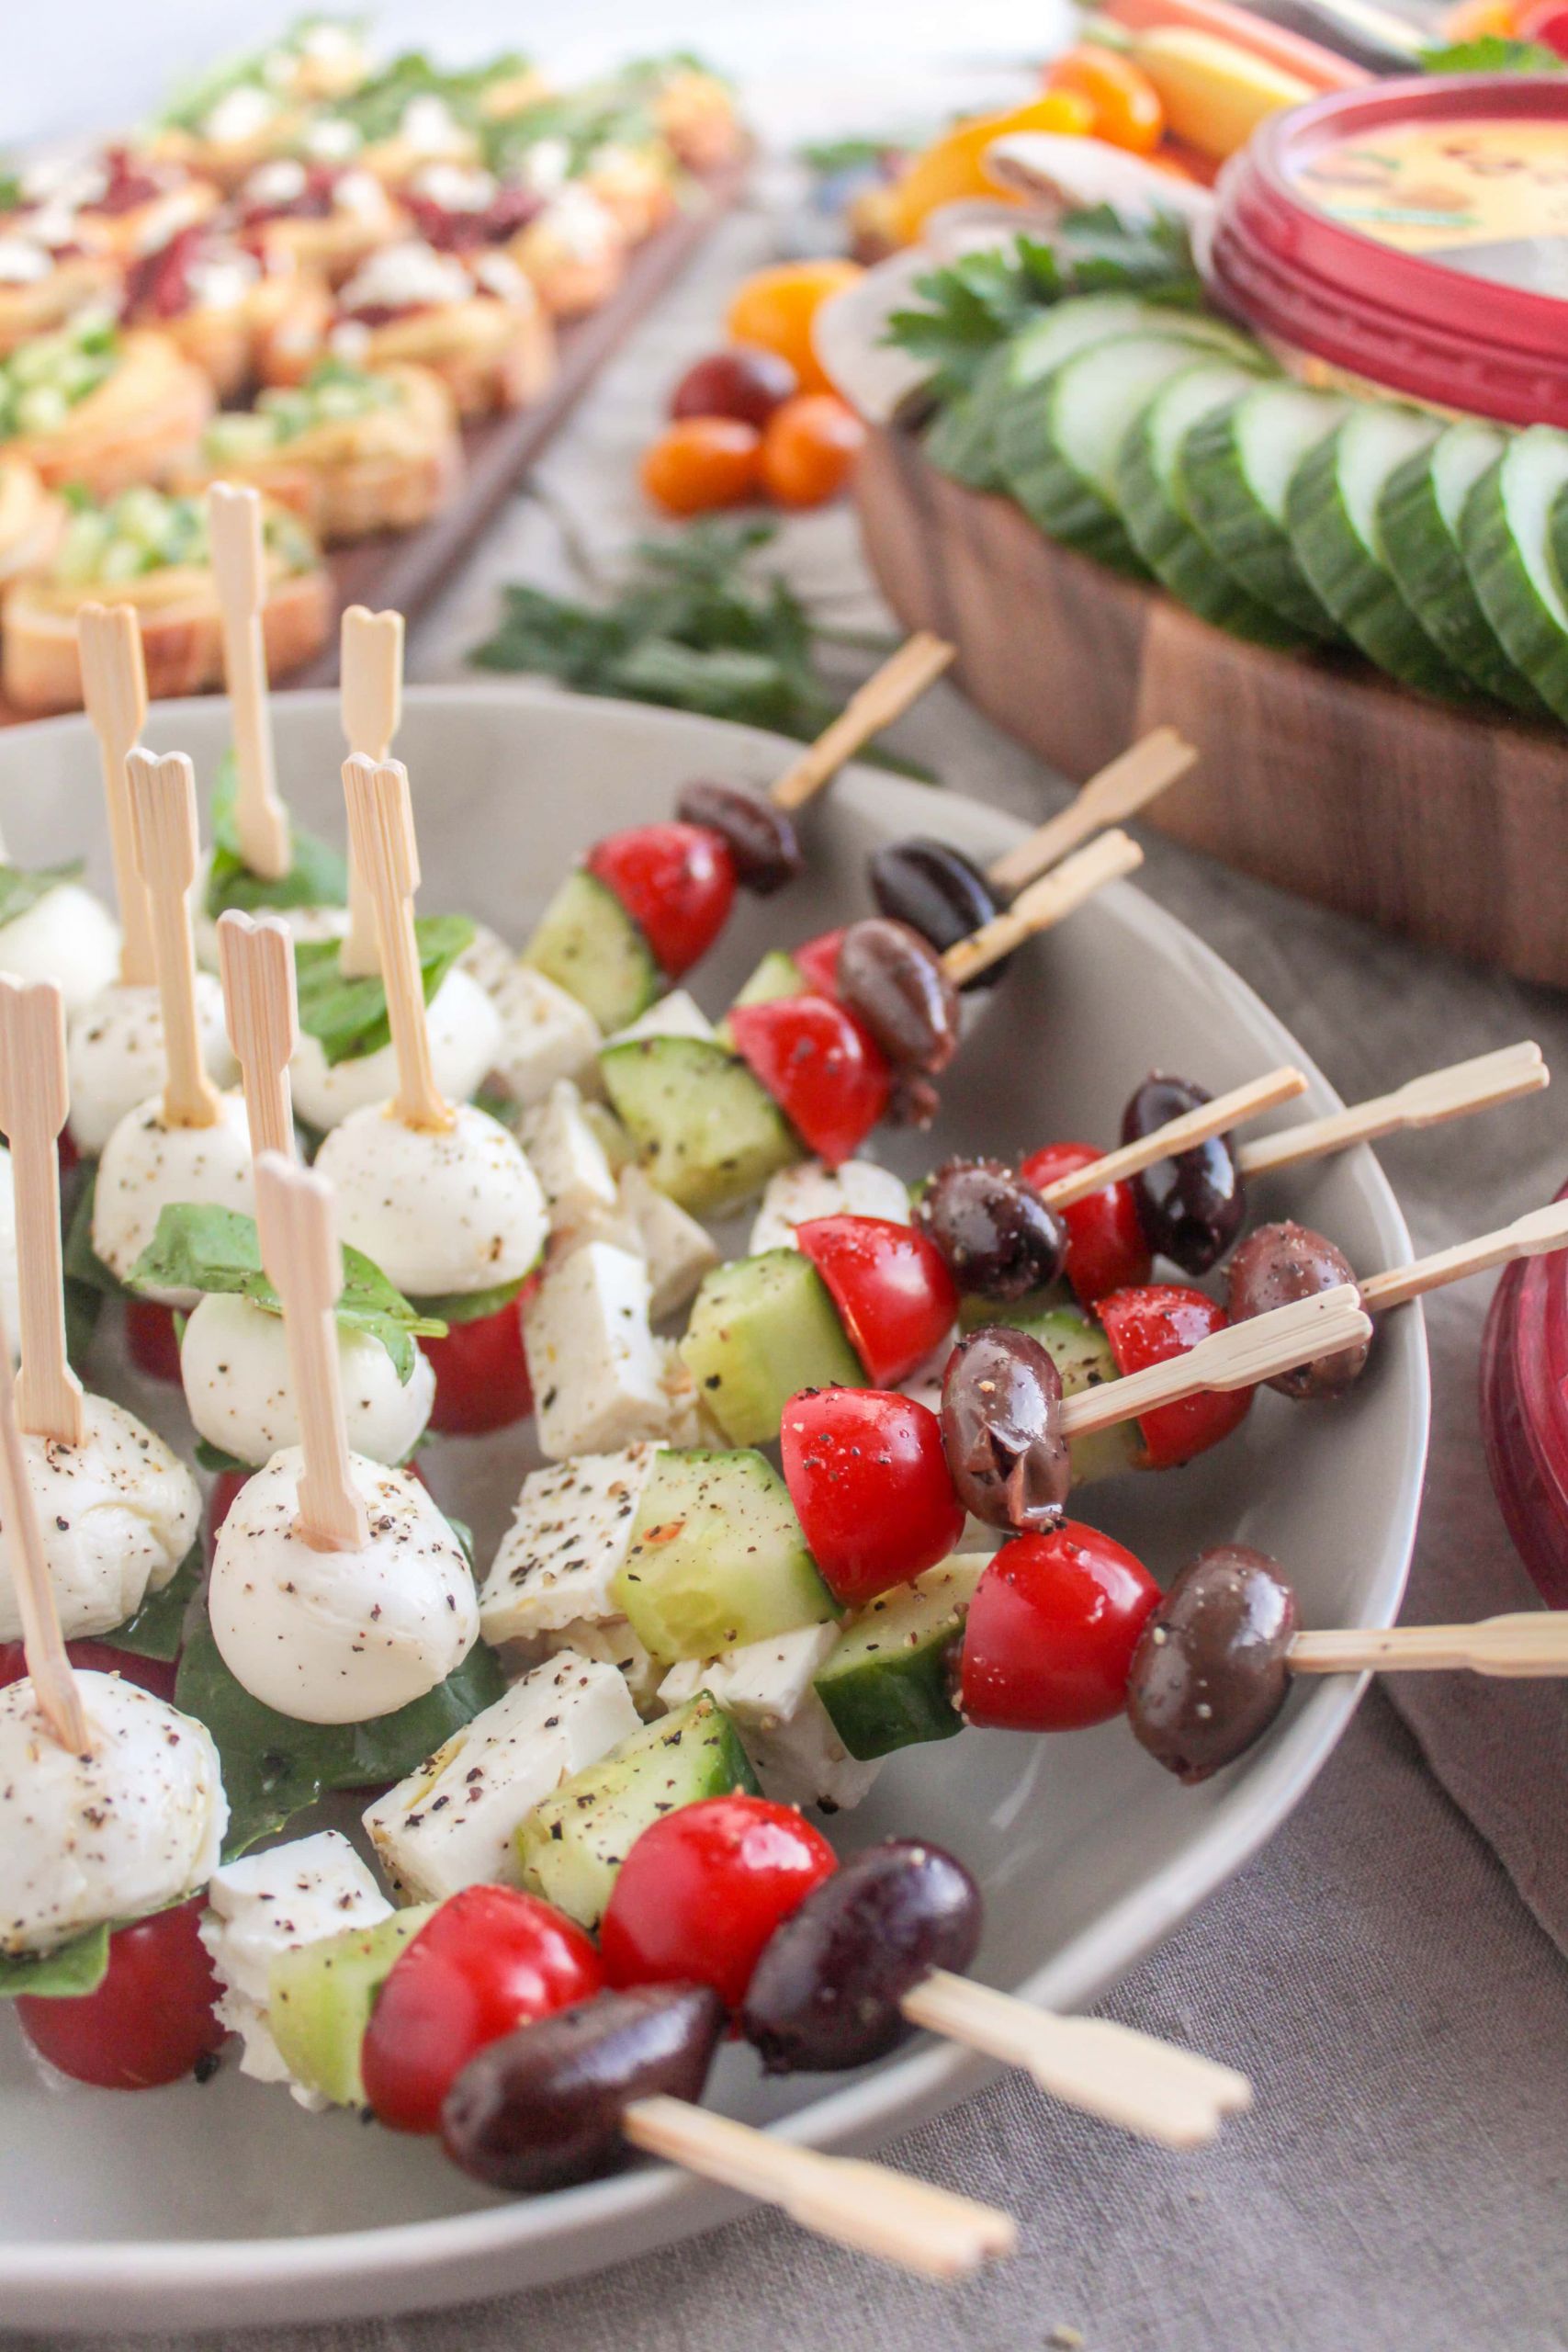 Superbowl Healthy Appetizers Inspirational Healthy Throw to Her Super Bowl Snacks Ideas